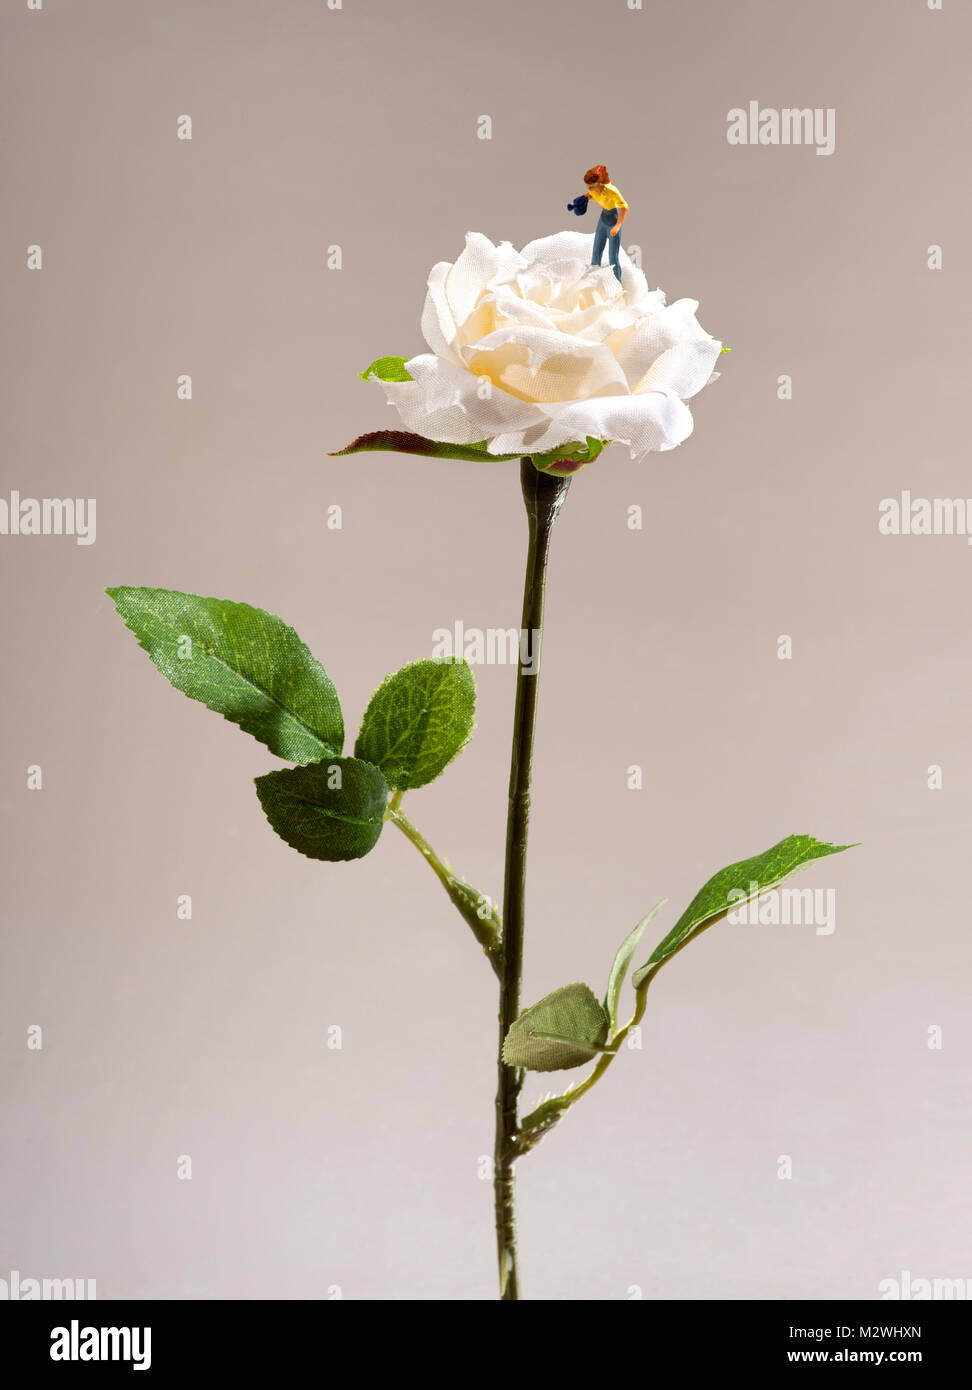 Miniature man watering a fresh fragrant white rose standing on top amongst the petals with his watering can over a neutral background with copy space Stock Photo